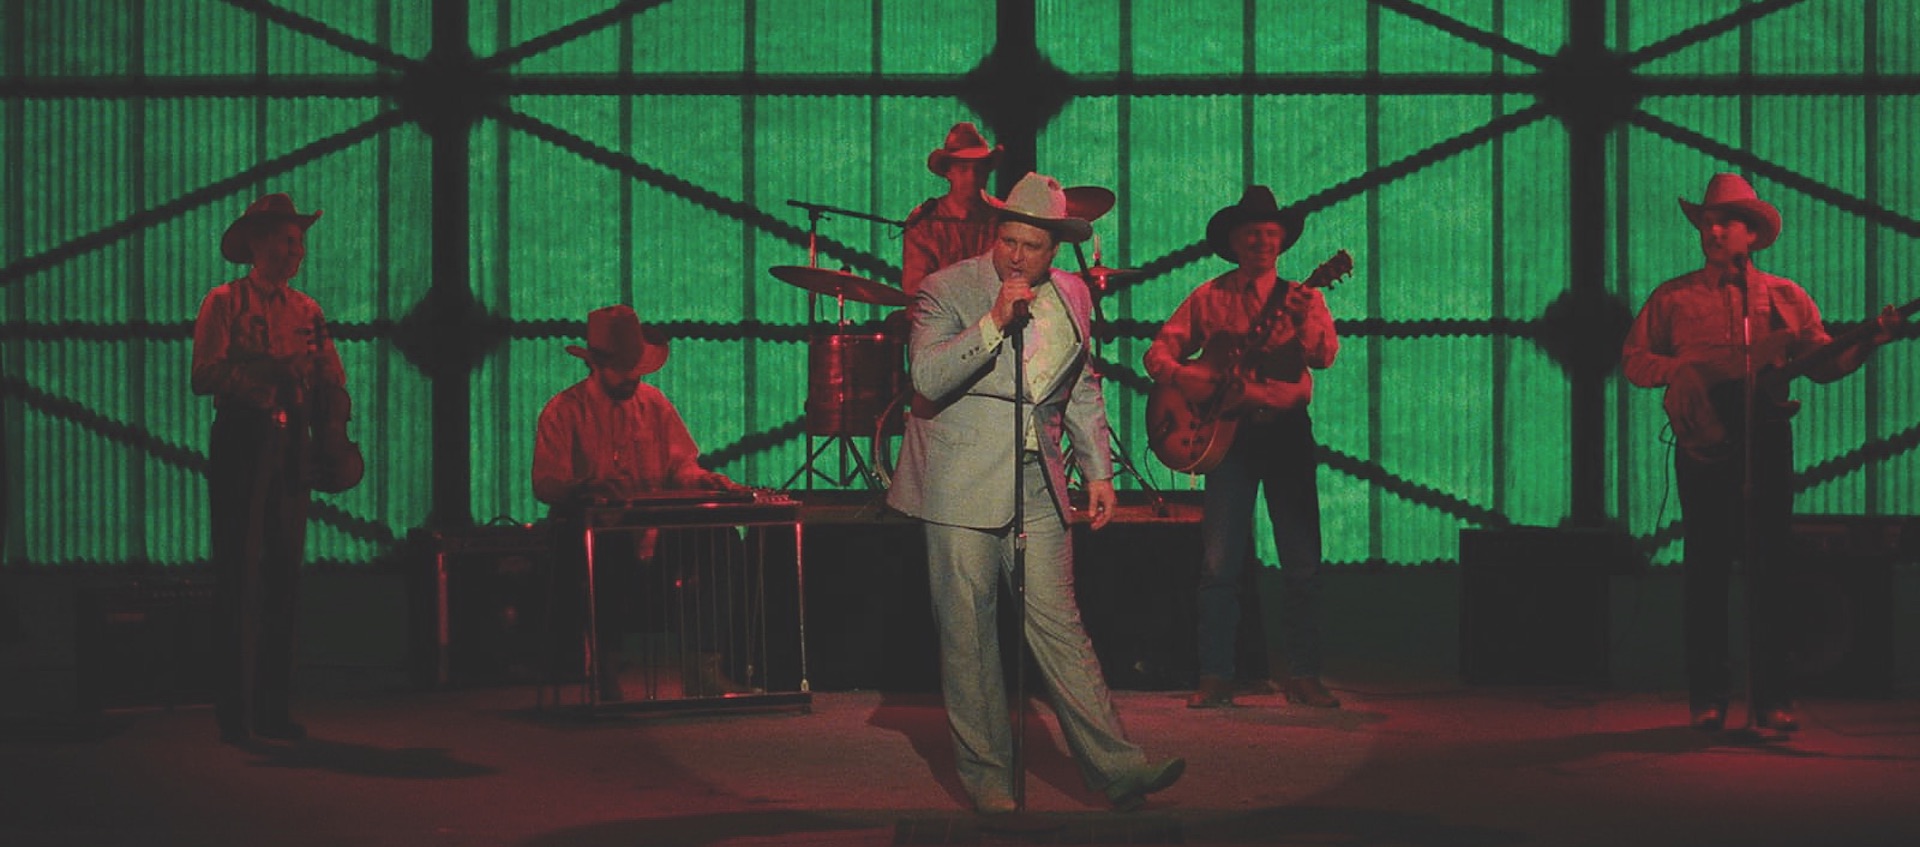 John Goodman sings on stage in a cowboy outfit in a scene from David Byrne's movie True Stories